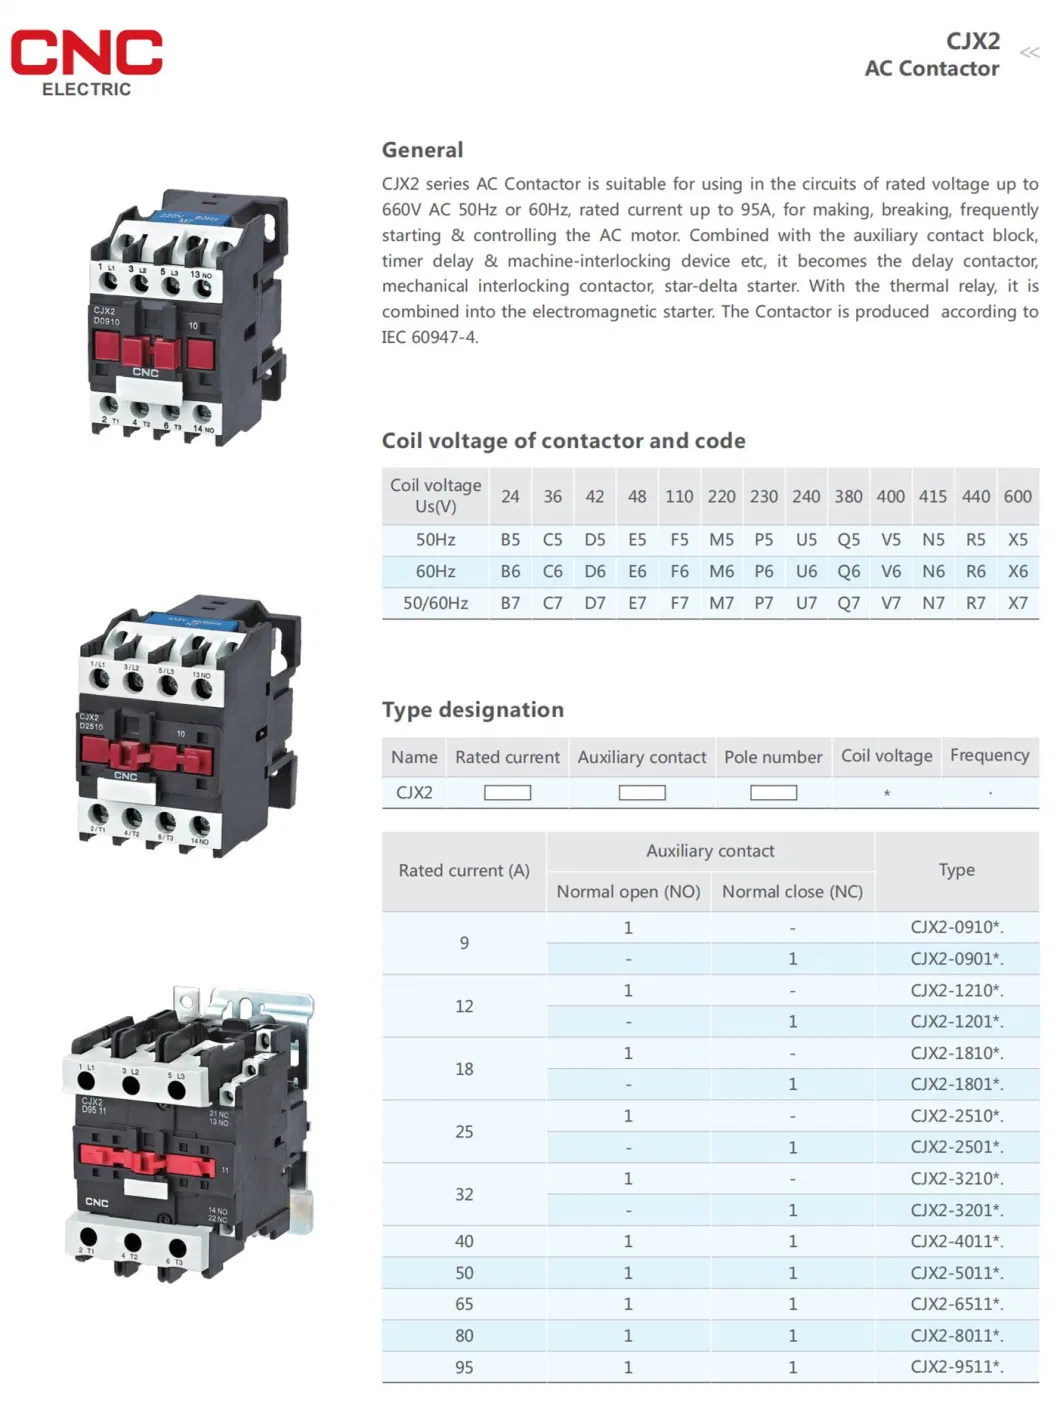 CNC Manufacture Price 9A 3 Phase Motor Starter 9A 120V Magnetic AC Contactor 95A Contactor